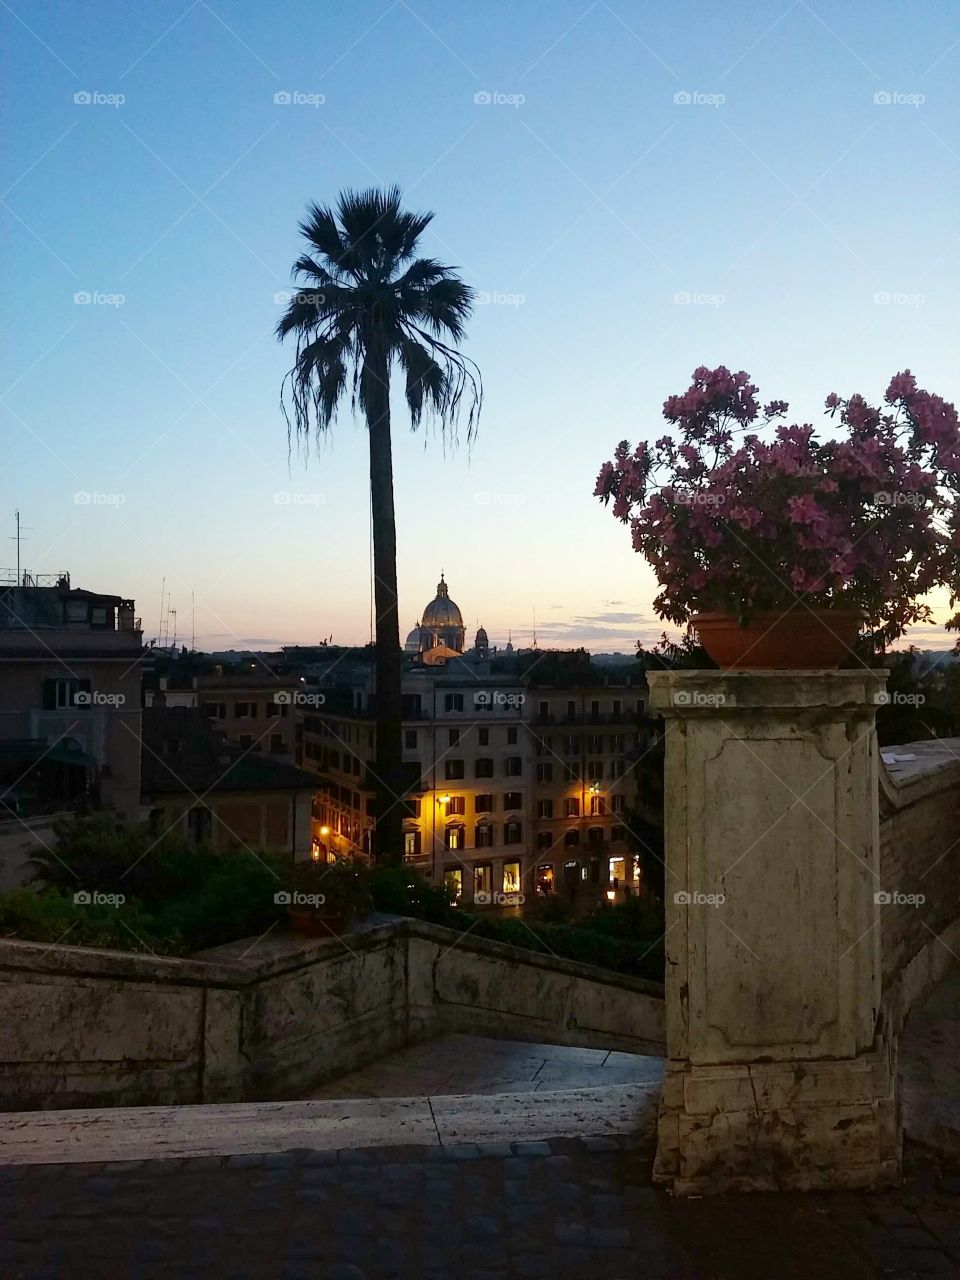 Rome, Italy at sunset